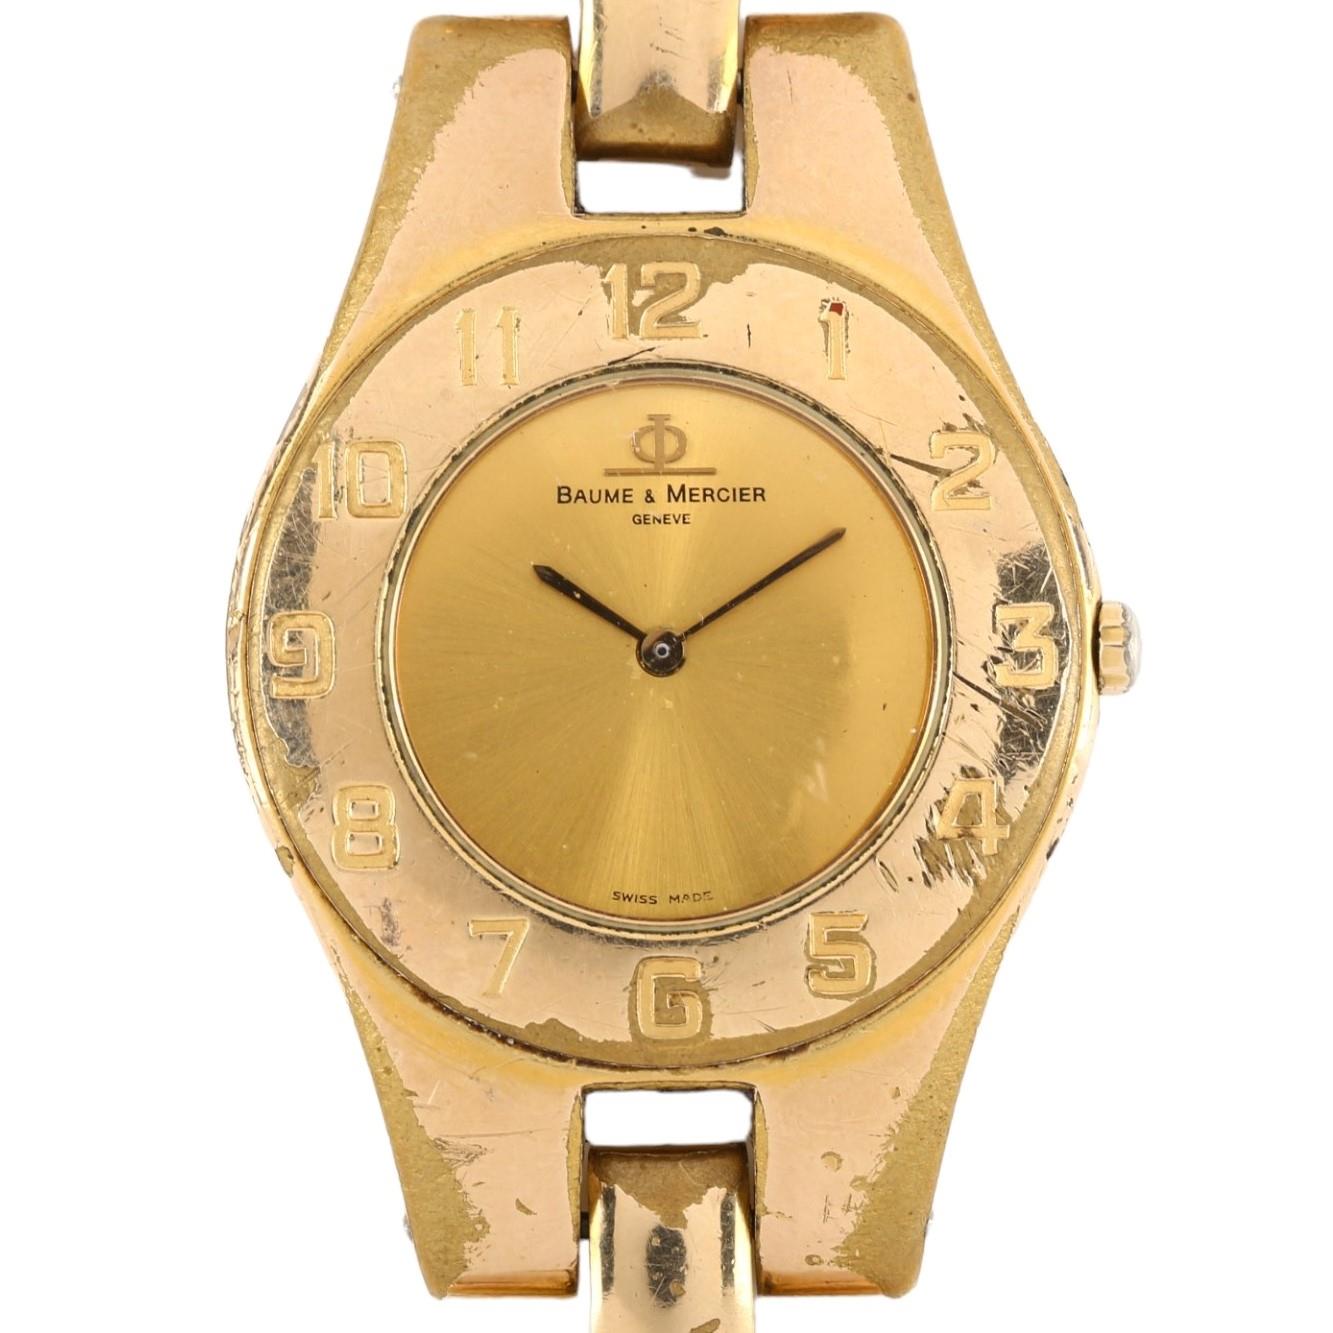 BAUME & MERCIER - a mid-size gold plated stainless steel quartz bracelet watch, champagne dial